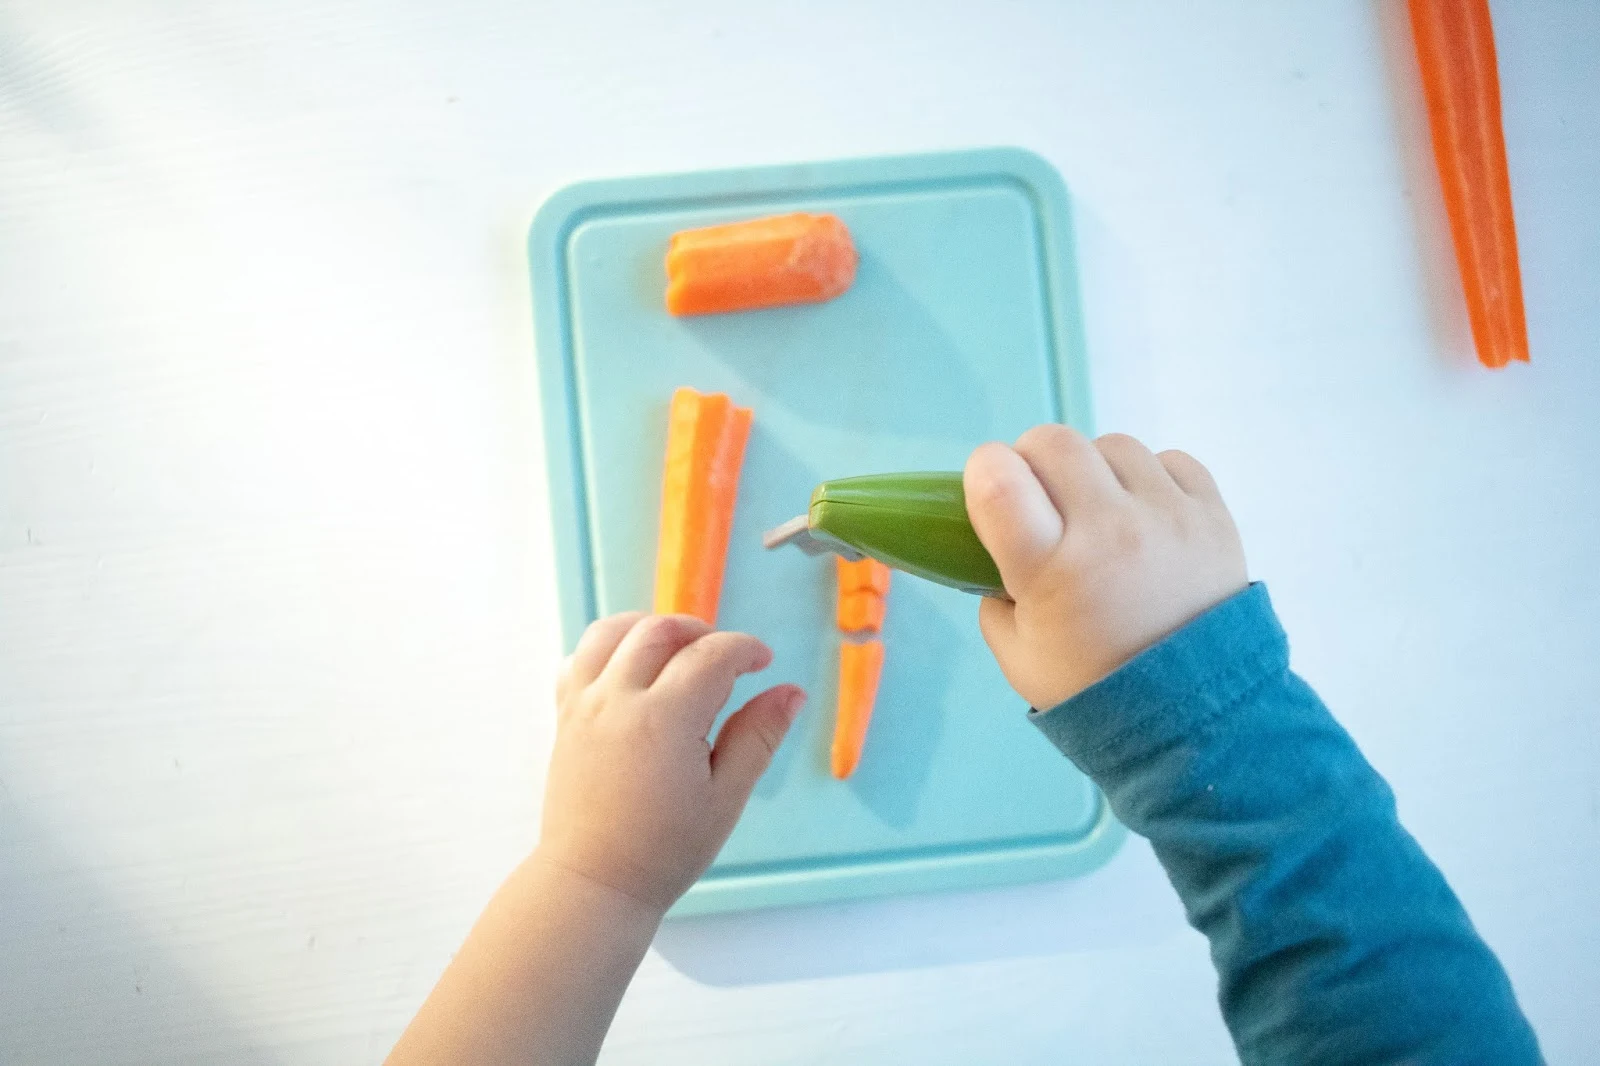 Here are some tips and tricks for introducing a wavy chopper knife to your toddler. This easy Montessori practical life tool can help encourage independence in the kitchen.